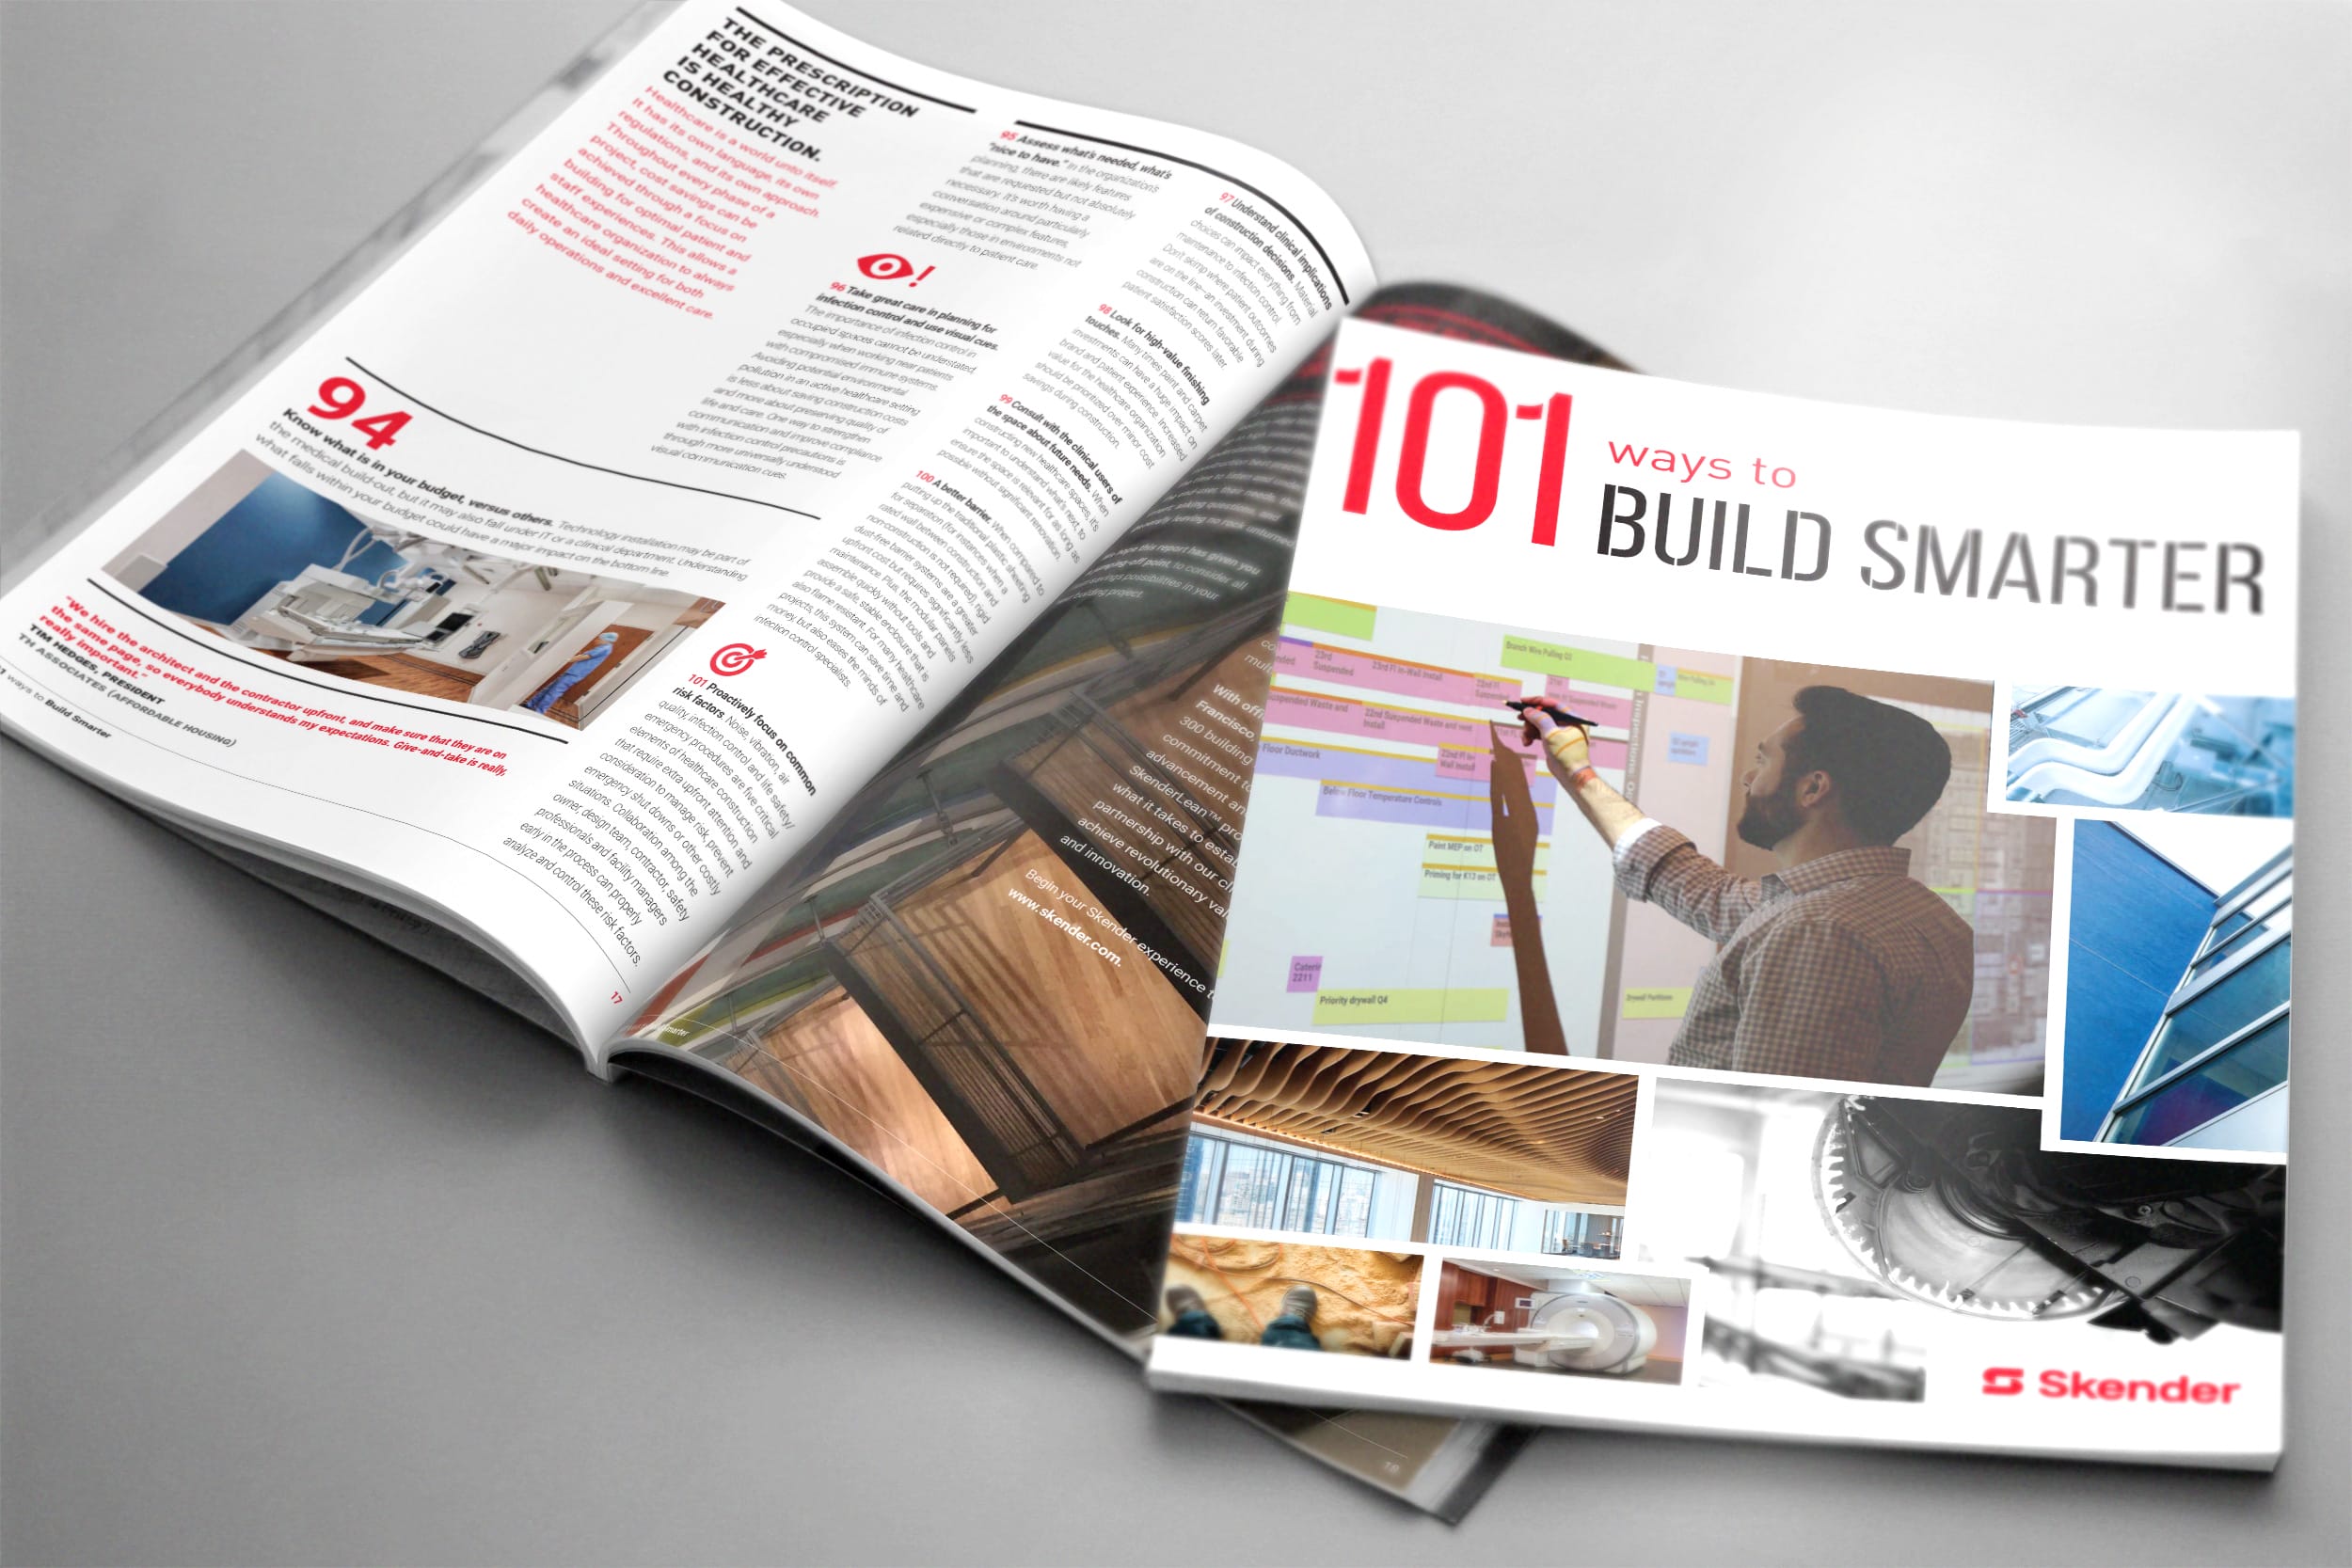 Skender Releases “101 Ways to Build Smarter” eBook, Featuring Ideas to Offset Rapidly Escalating Construction Prices